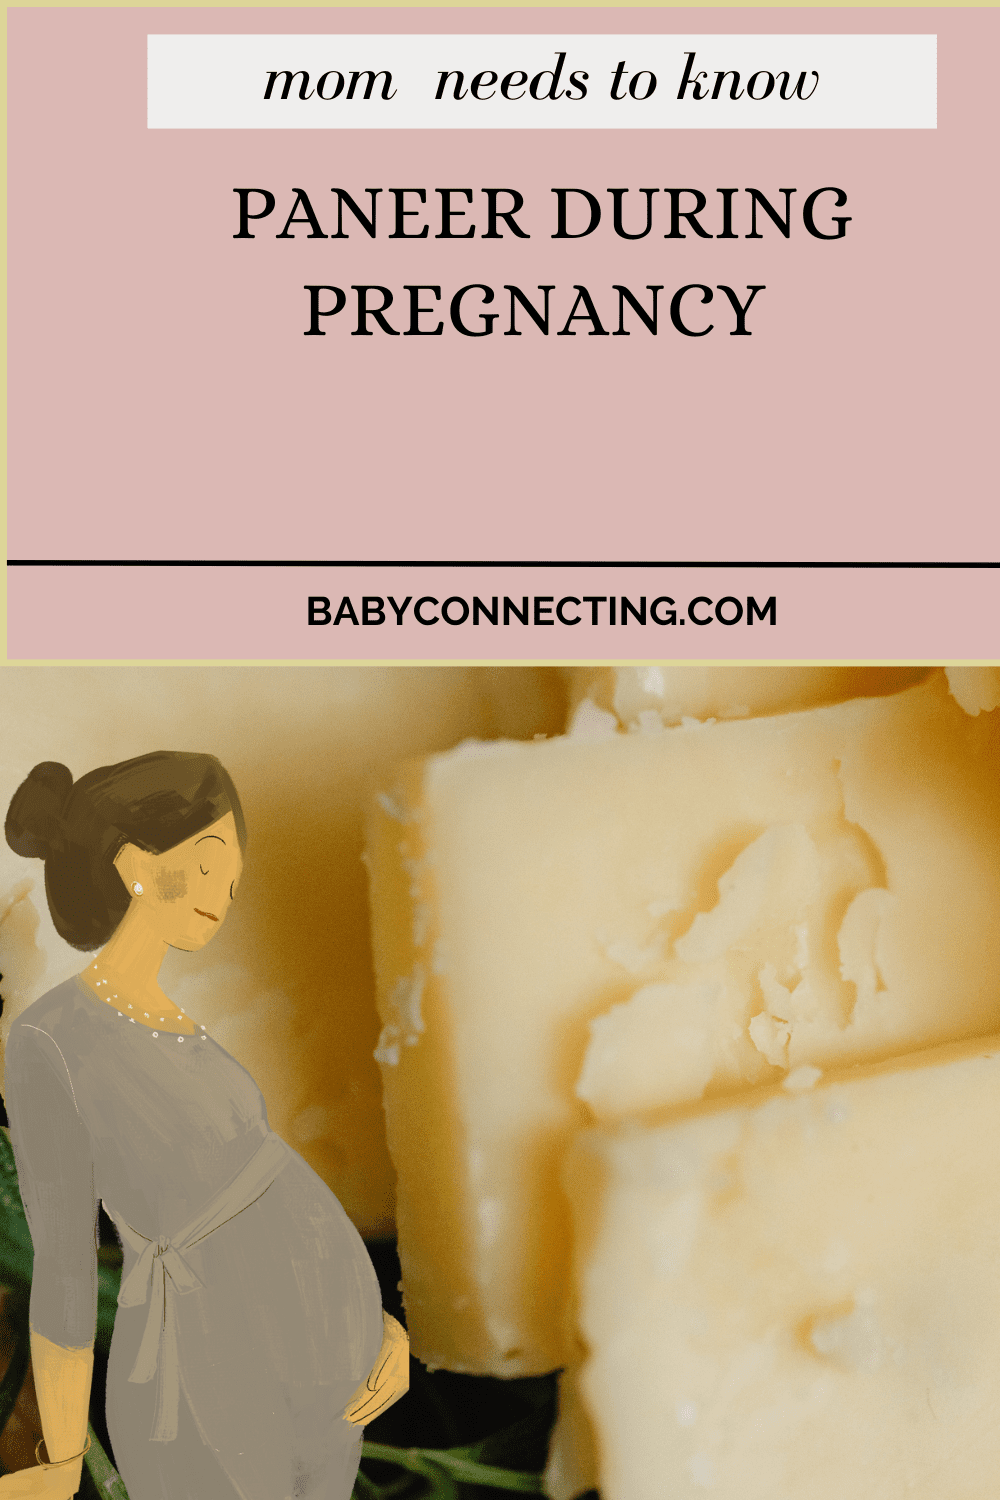 Paneer During Pregnancy: Benefits and Side Effects